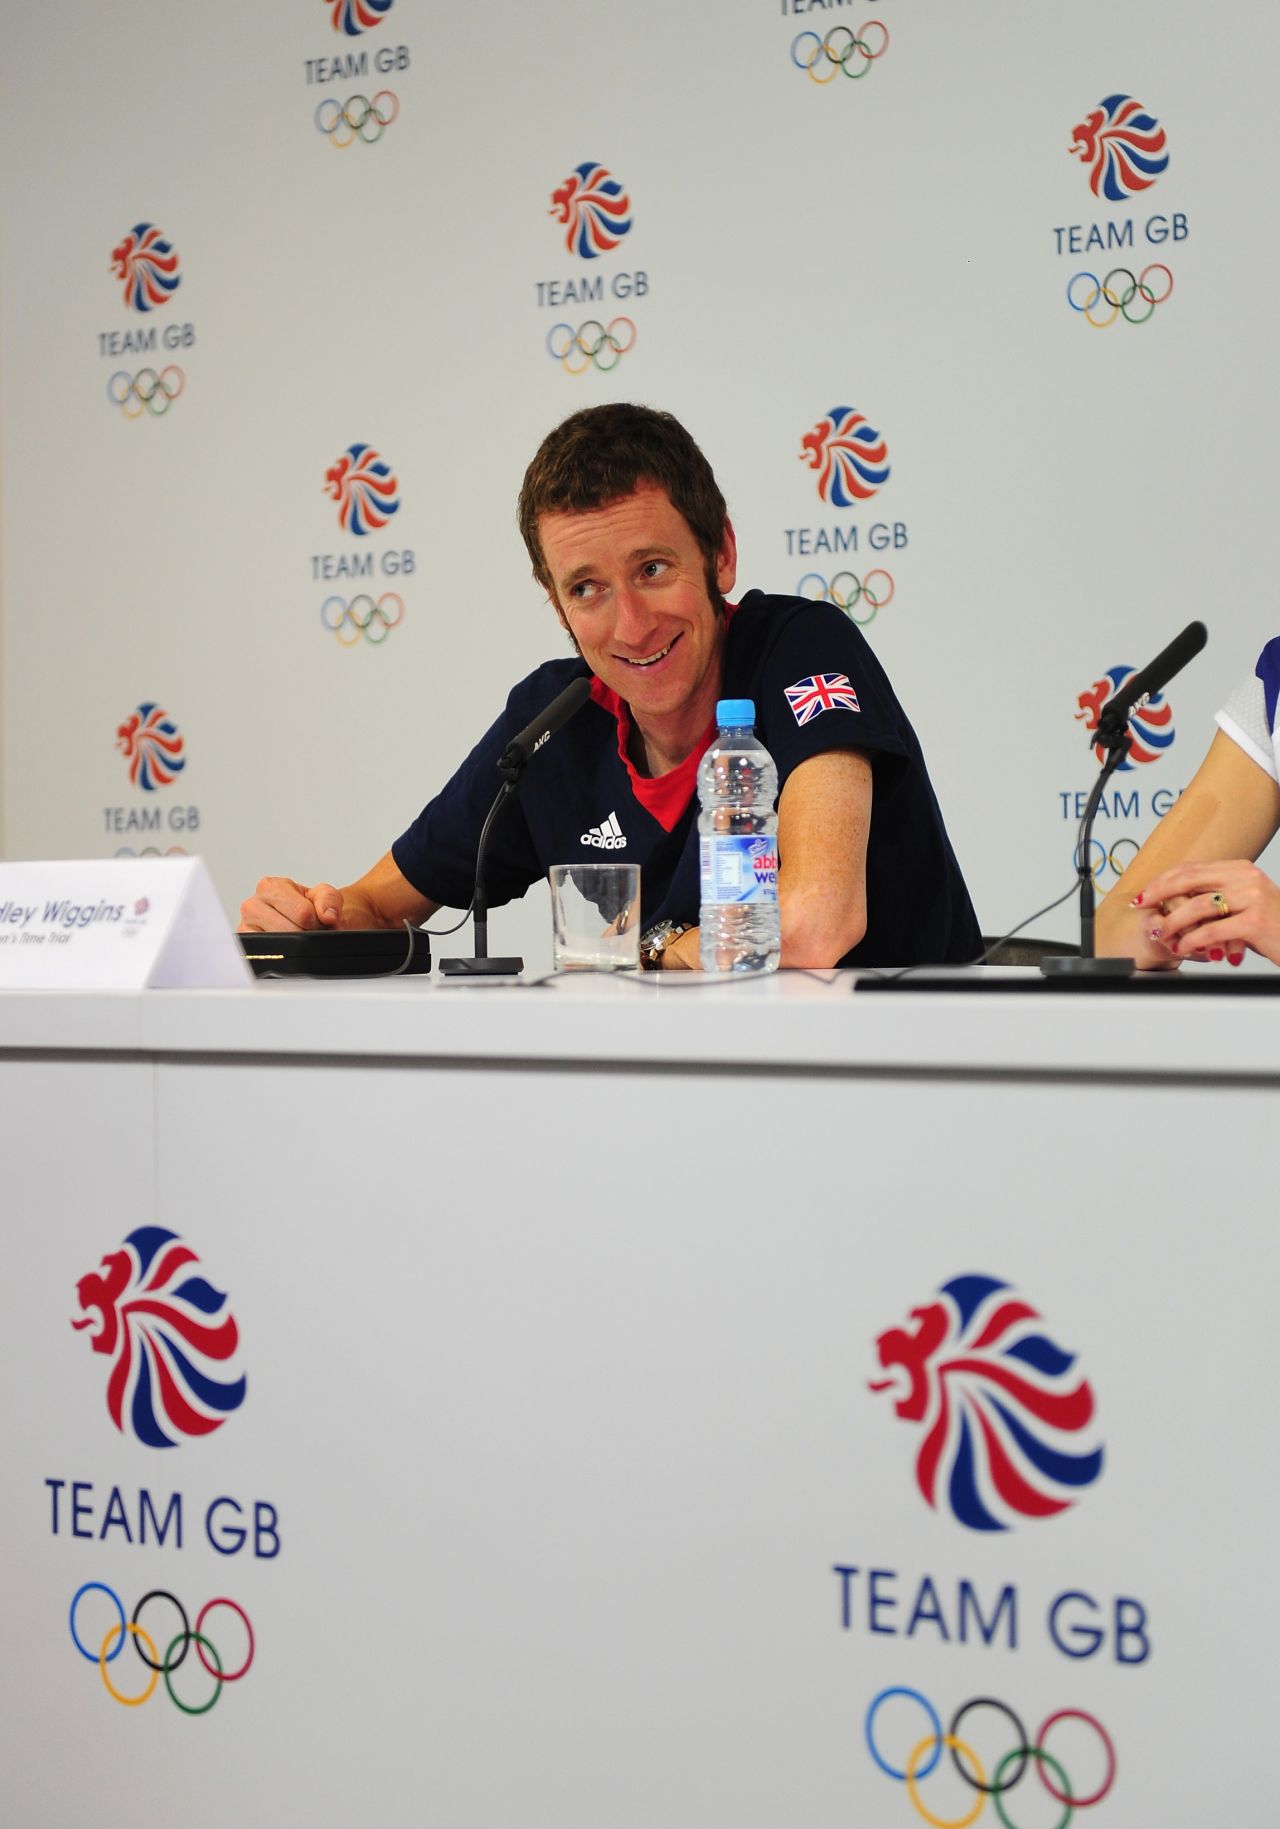 Wiggins' everyman charm did much to win over sections of the British public wary of hosting the 2012 London Olympics.